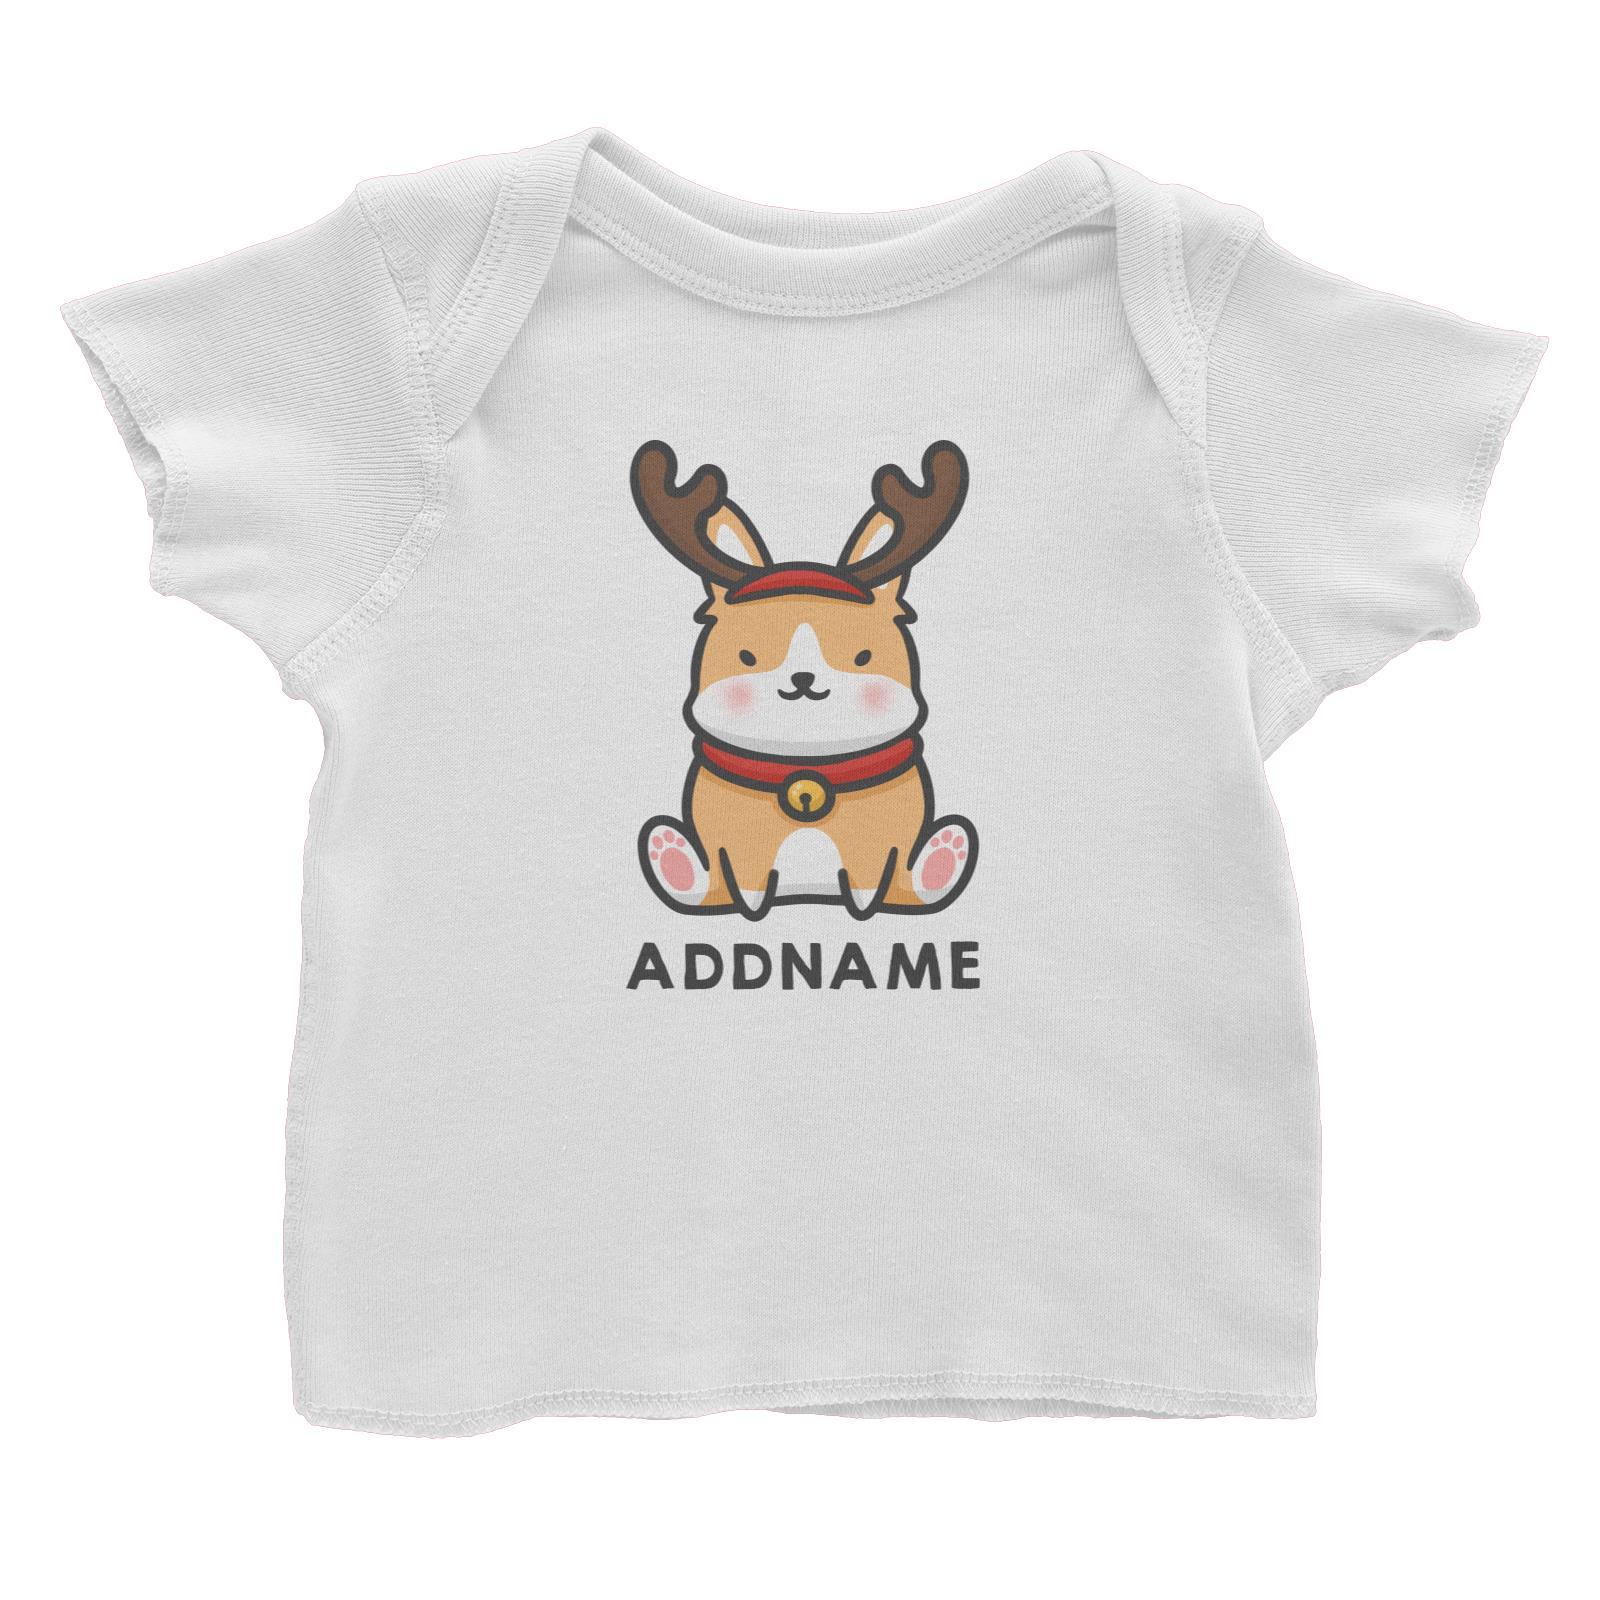 Xmas Cute Dog With Reindeer Antlers Addname Accessories Baby T-Shirt